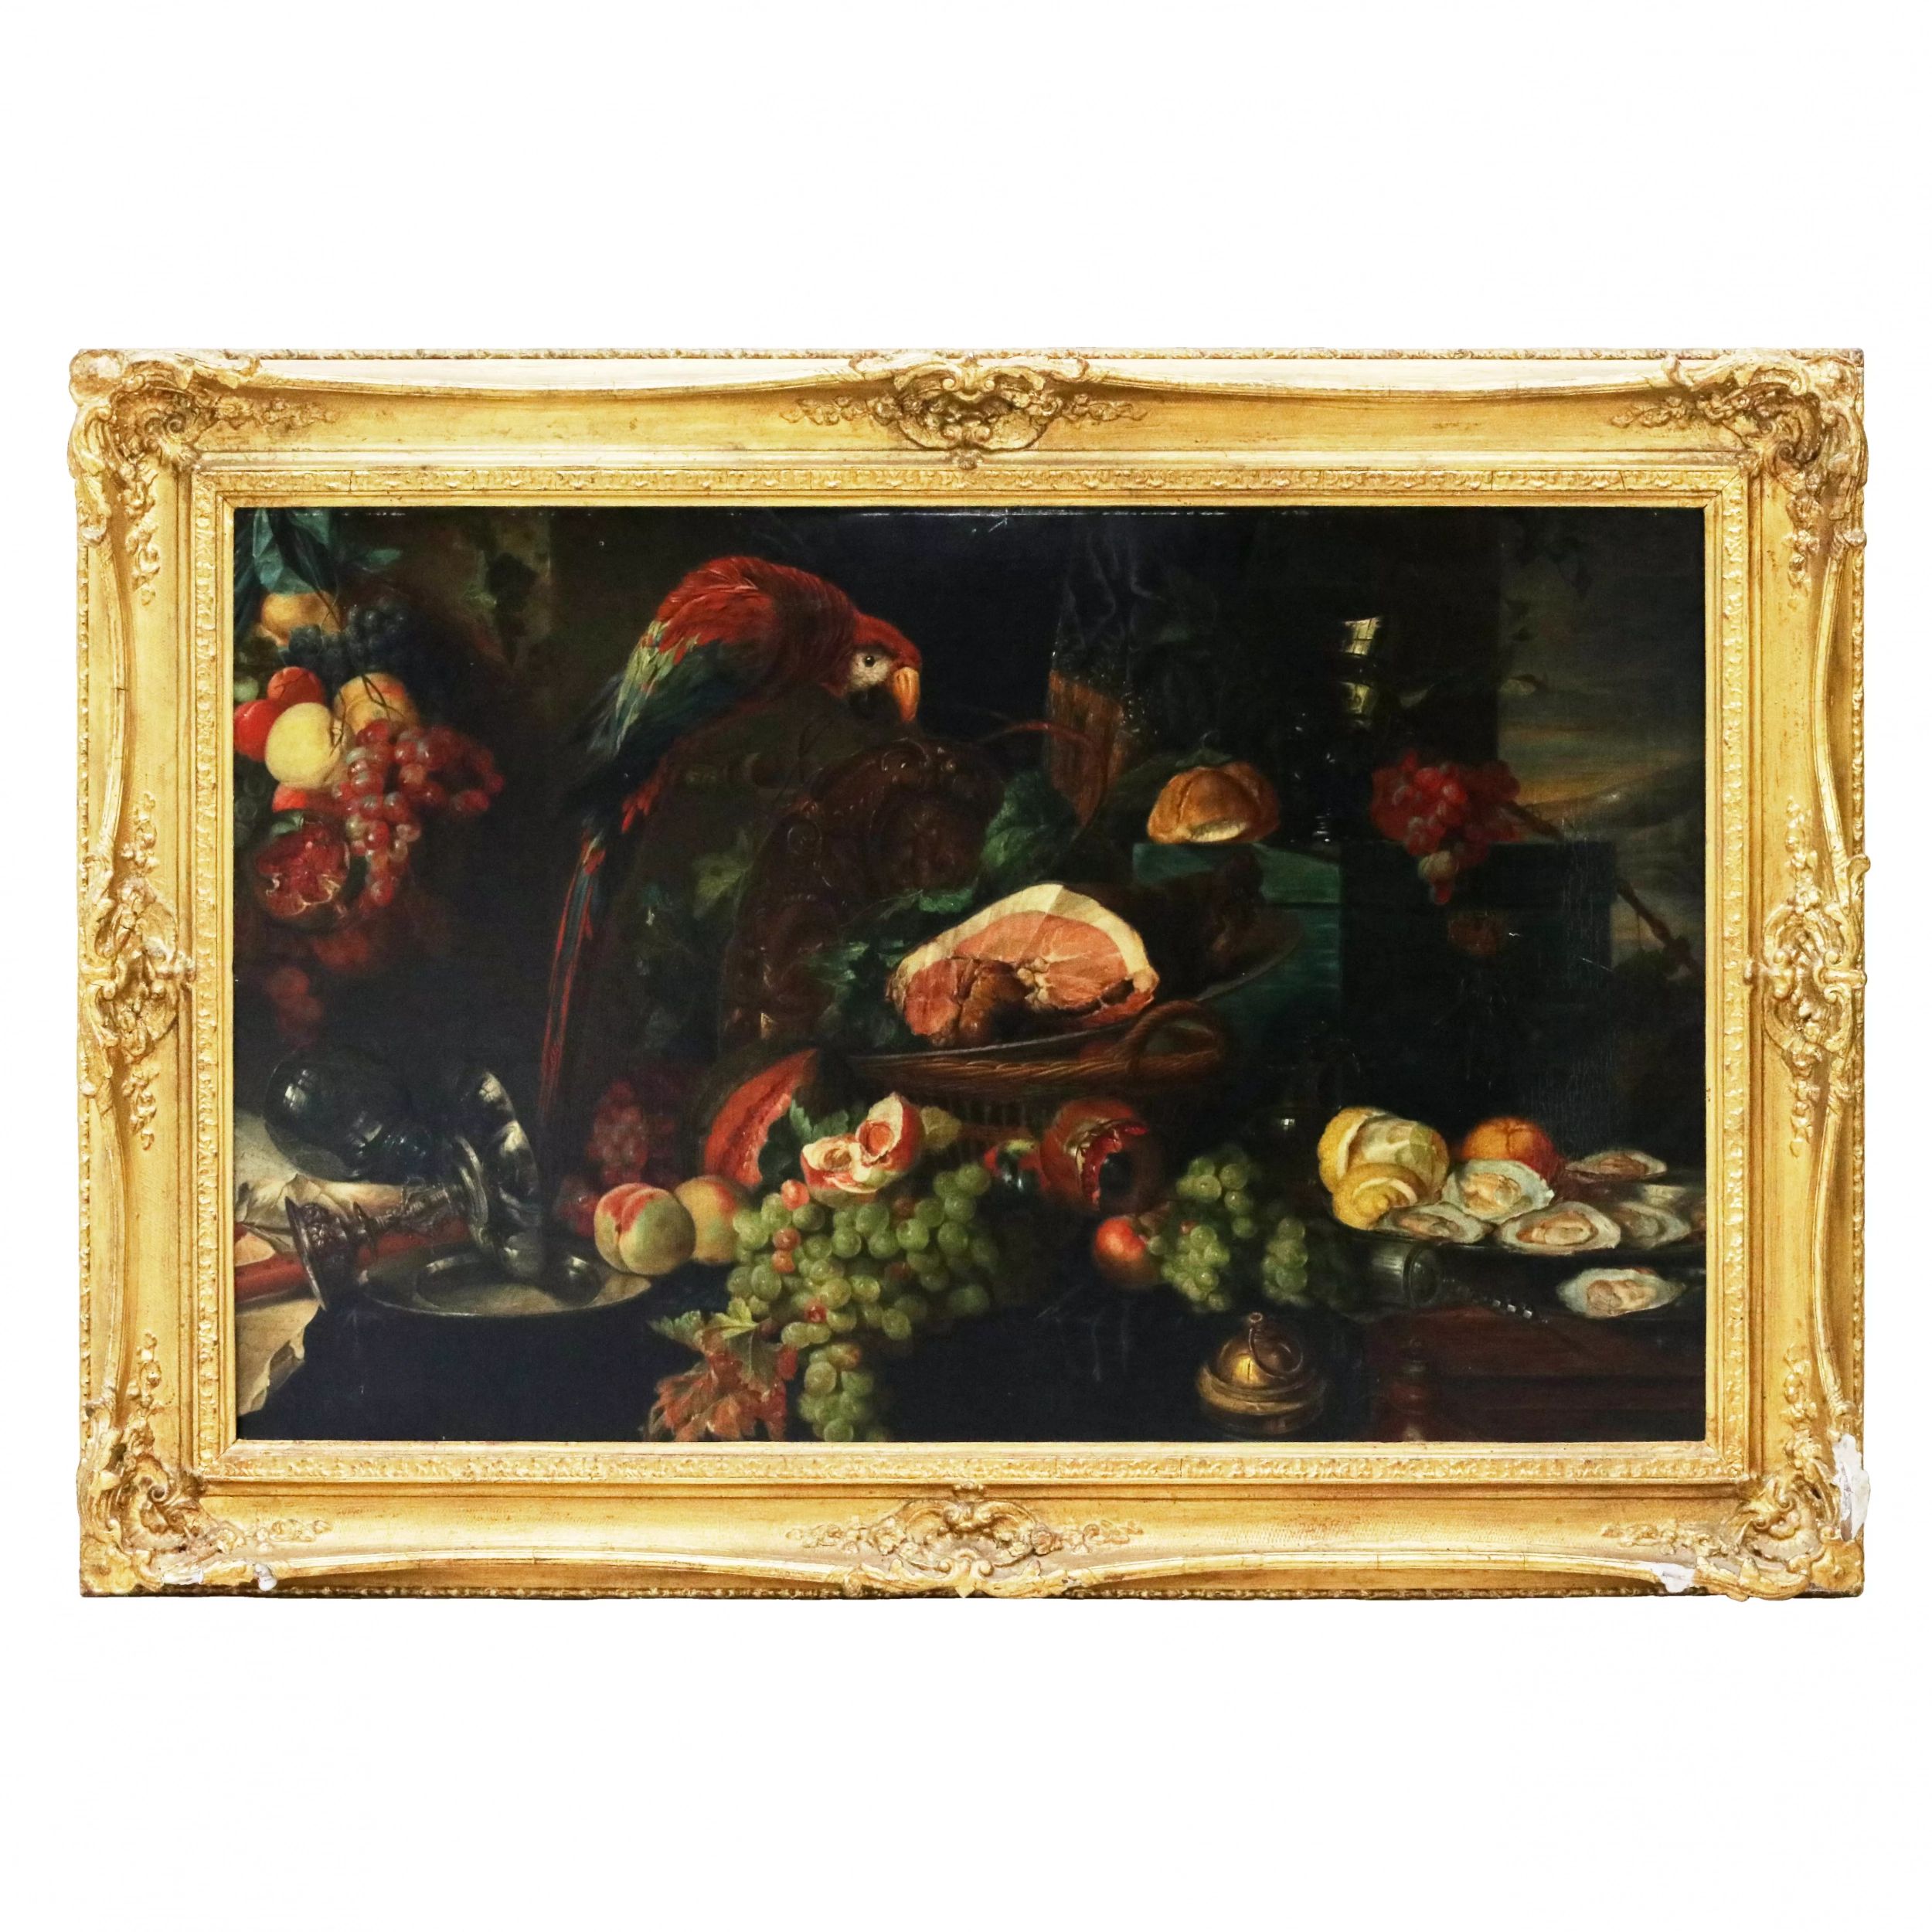 Majestic-still-life-with-gifts-of-nature-and-a-parrot-19th-century-By-Jan-David-De-Heem-